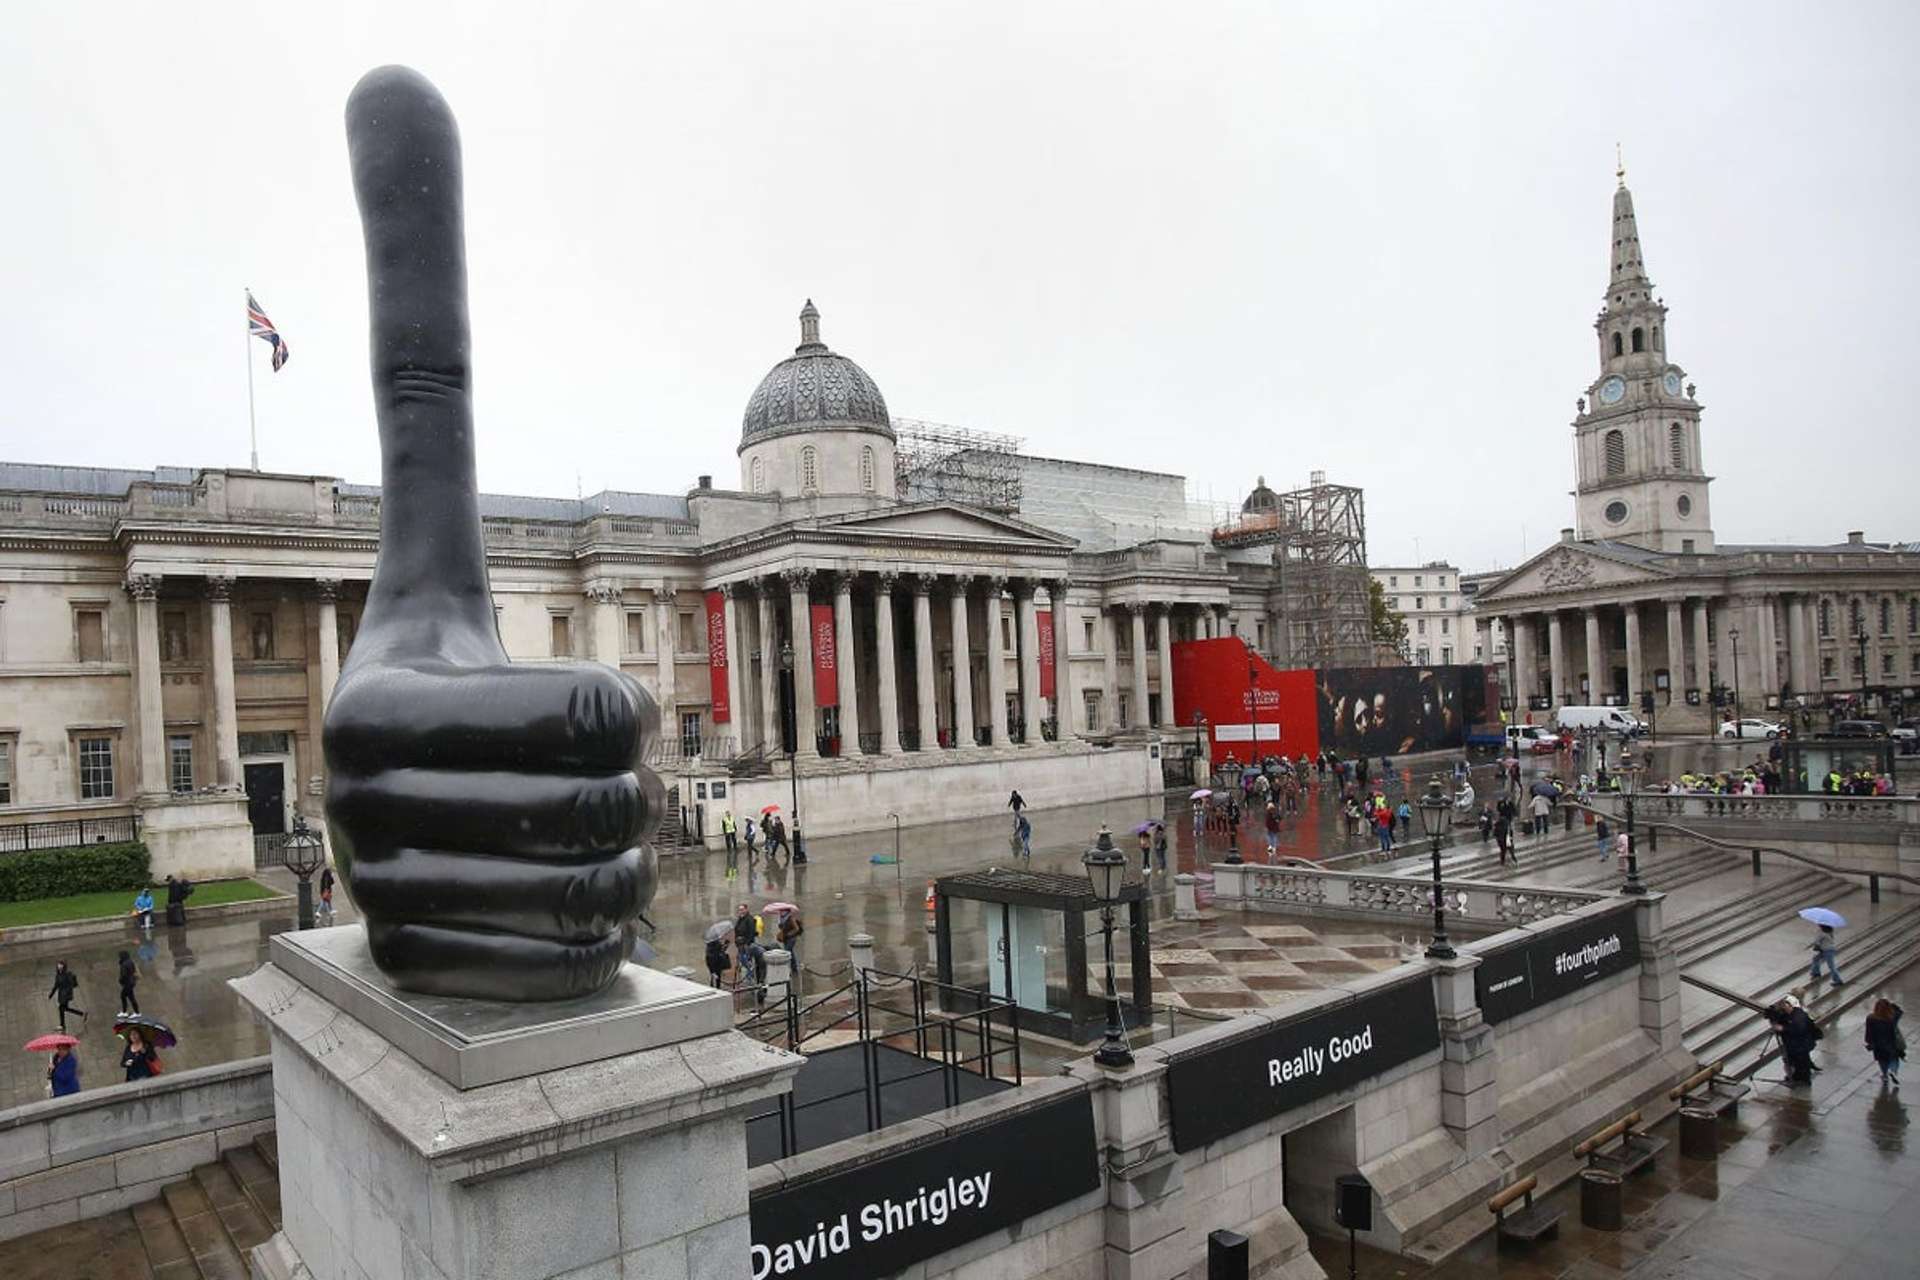 An image of the giant sculpture Really Good by artist David Shrigley, a massive thumbs-up displayed on Trafalgar’s Square Fourth Plinth. The National Gallery, London is in the background.An image of the giant sculpture Really Good by artist David Shrigley, a massive thumbs-up displayed on Trafalgar’s Square Fourth Plinth. The National Gallery, London is in the background.